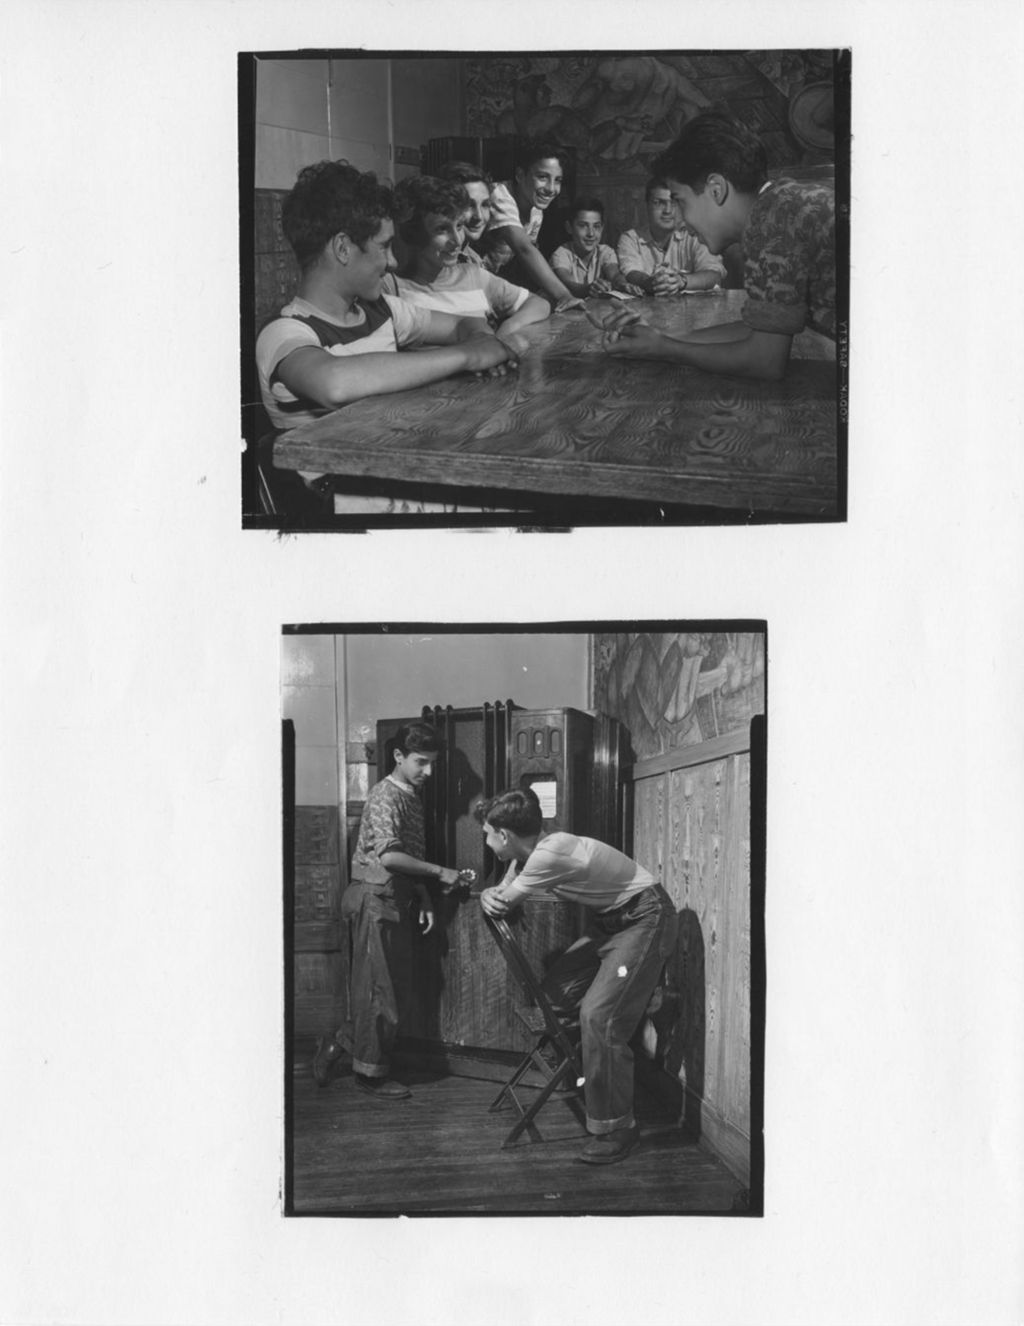 Miniature of (Top photo) Boys meeting around a table; (Bottom photo) Two boys hang out next to jukebox